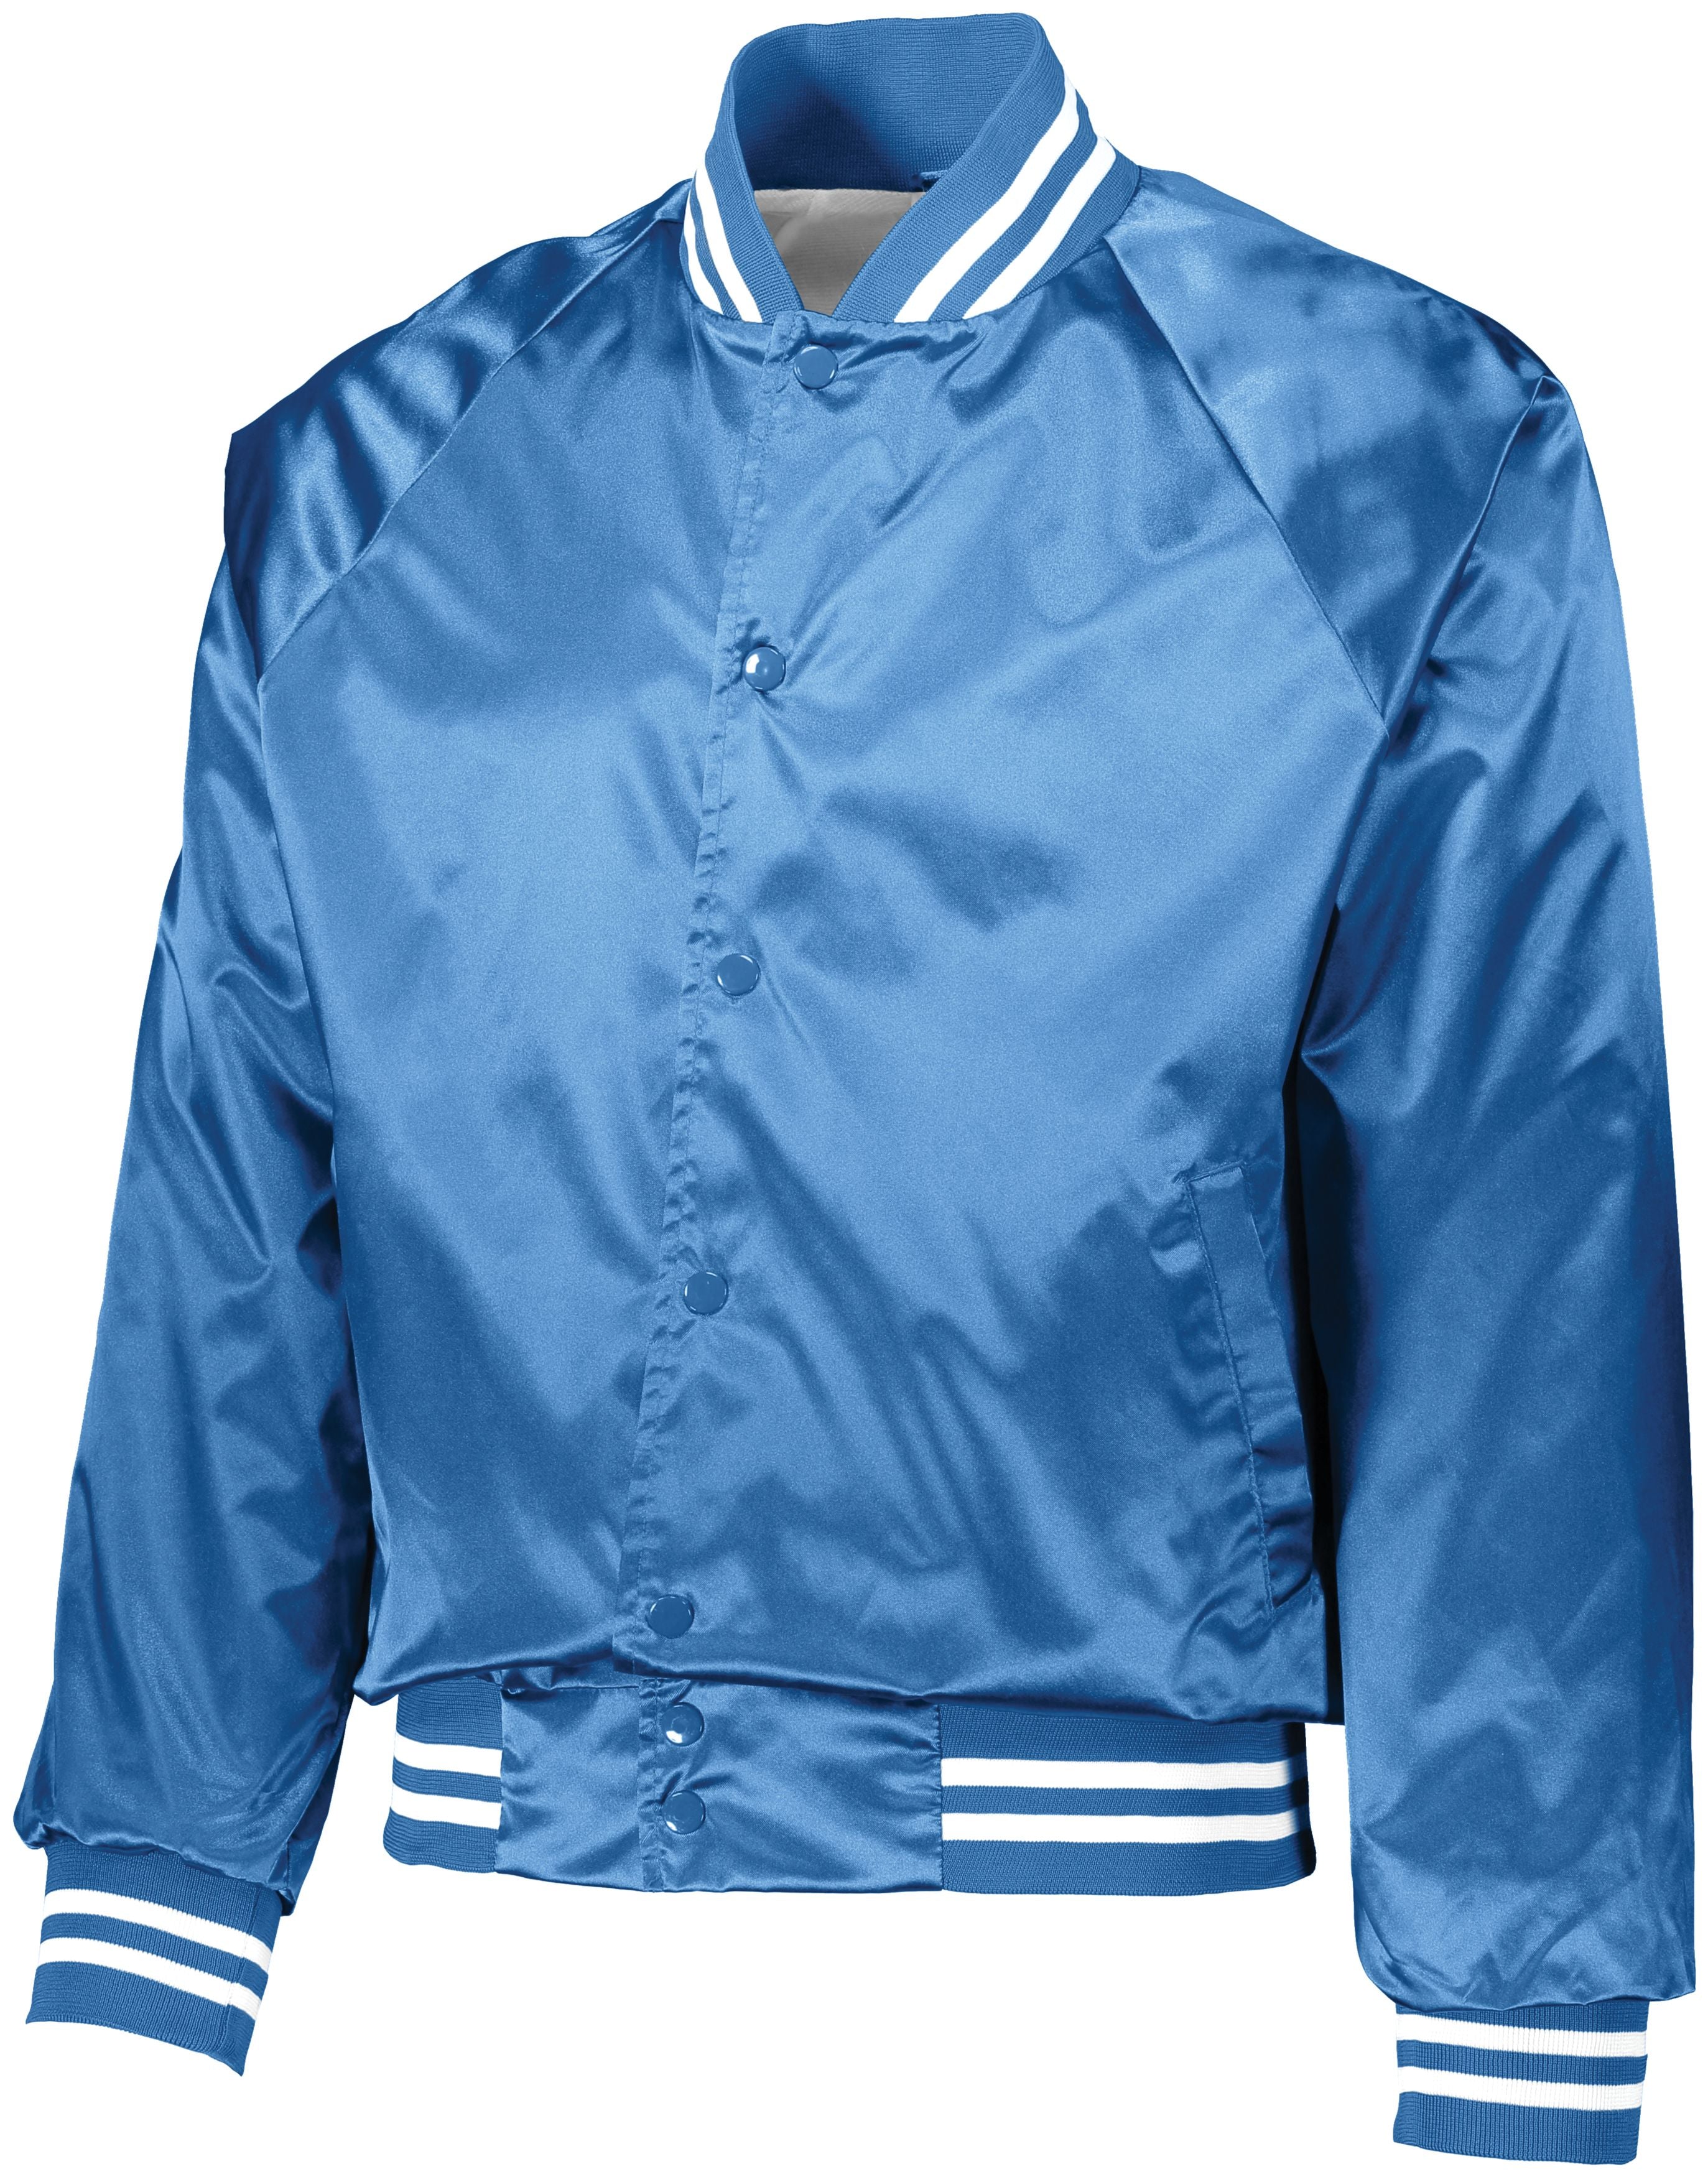 Augusta Sportswear Satin Baseball Jacket/Striped Trim in Columbia Blue/White  -Part of the Adult, Adult-Jacket, Augusta-Products, Baseball, Outerwear, All-Sports, All-Sports-1 product lines at KanaleyCreations.com